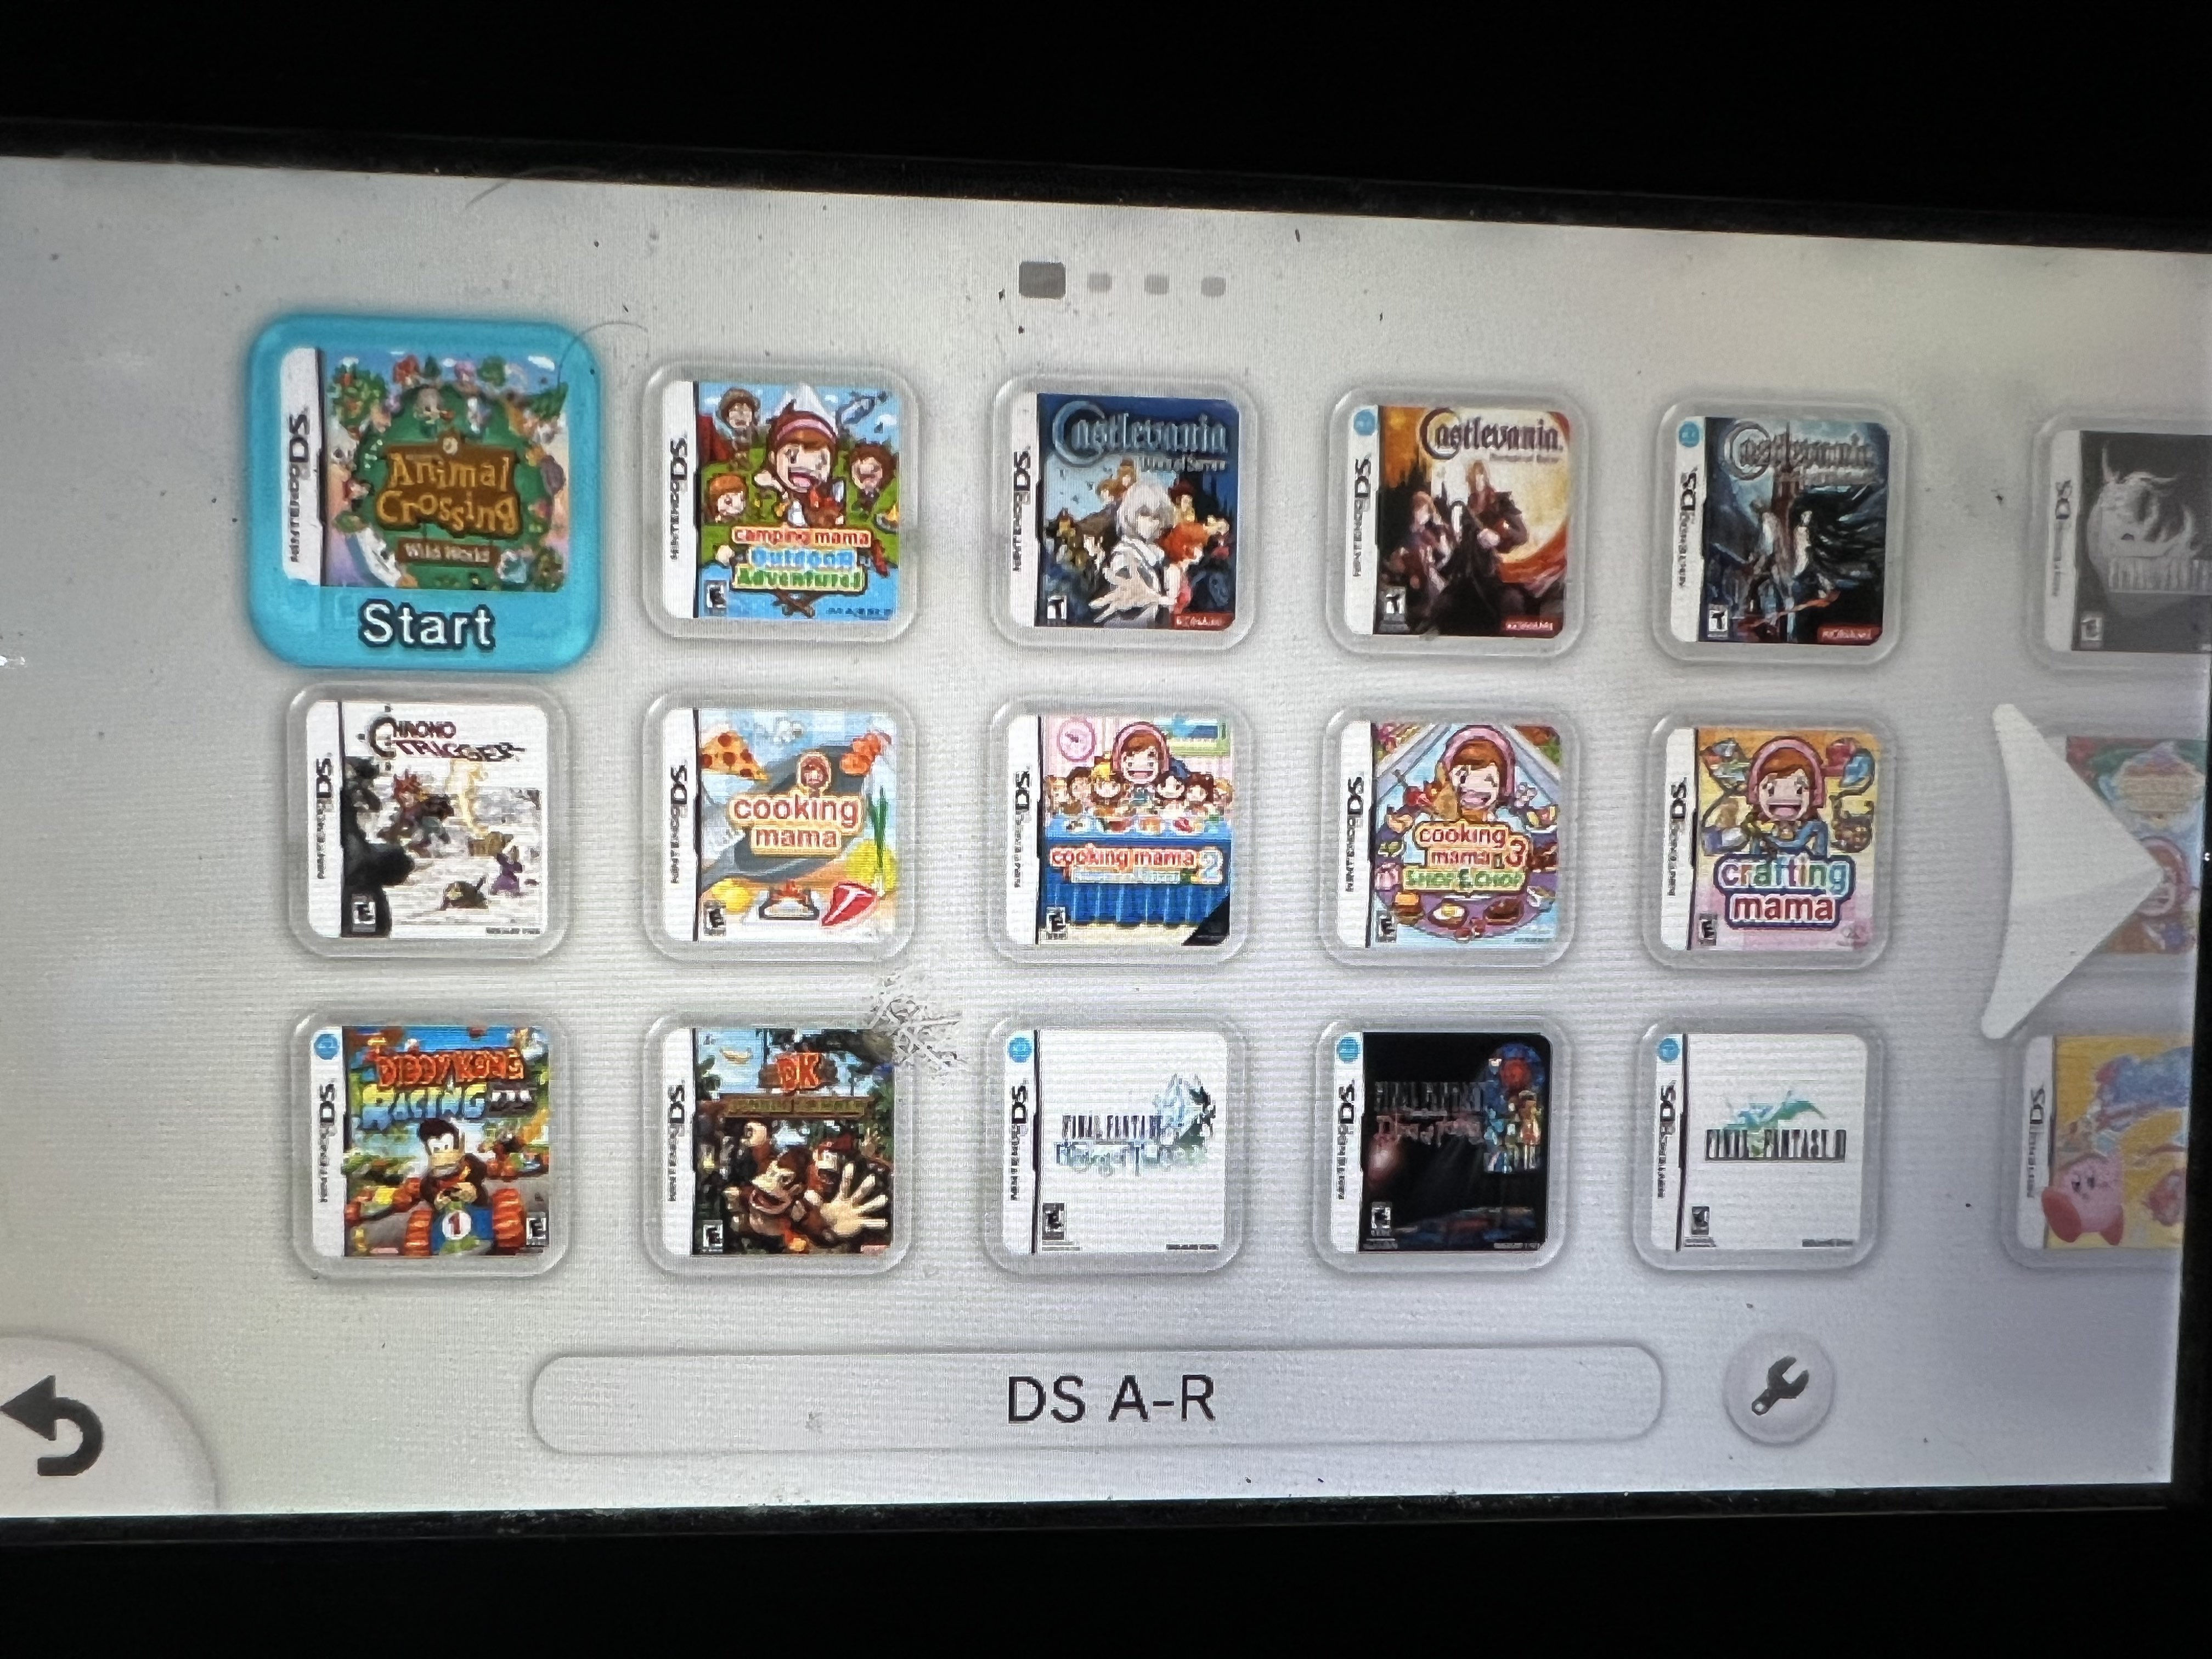 Problems with forwarders for Wii U